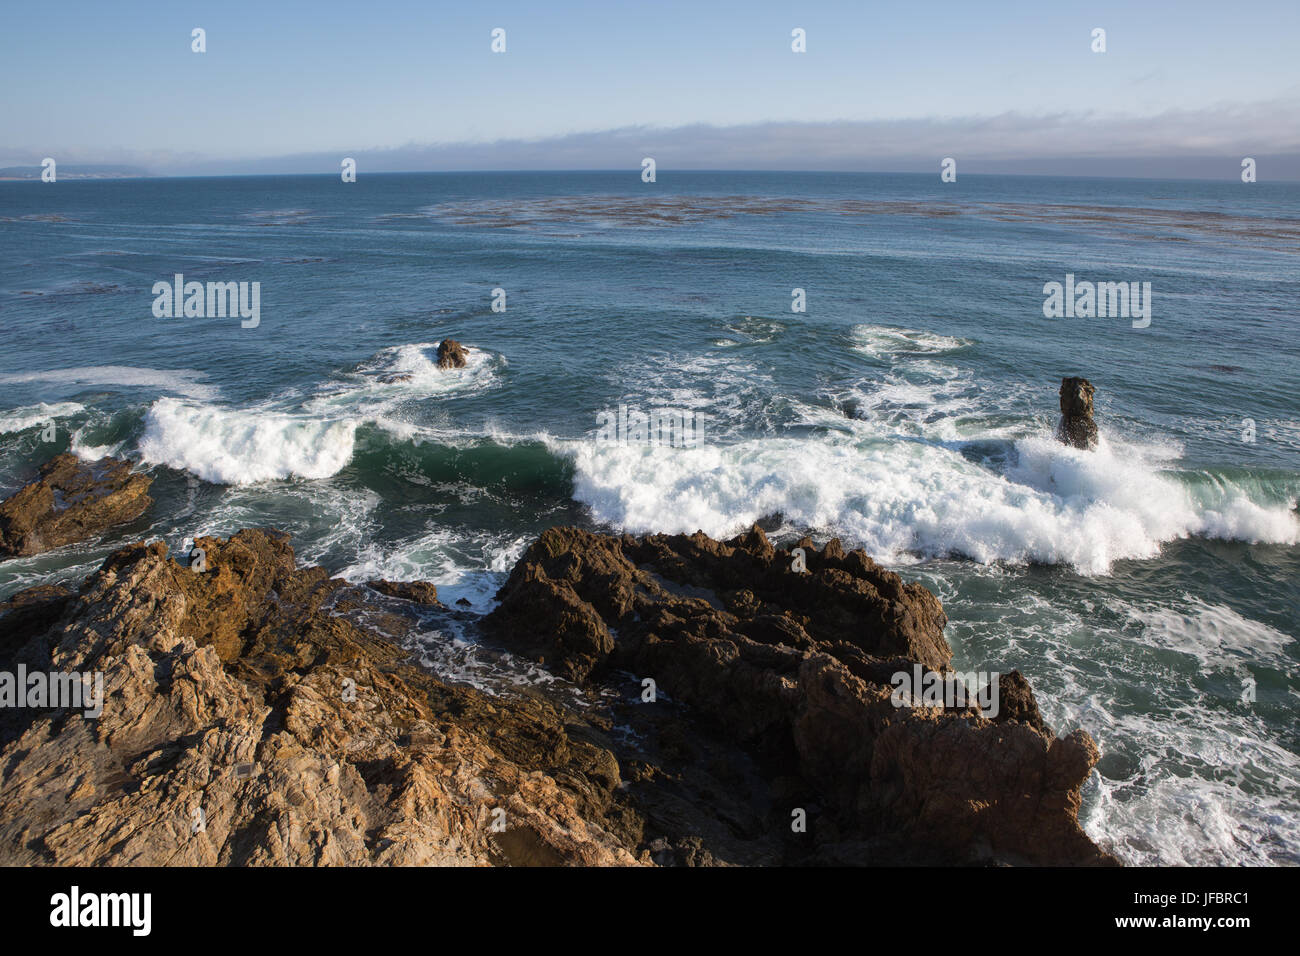 Waves crash onto rock formations on a Pacific coast. Stock Photo